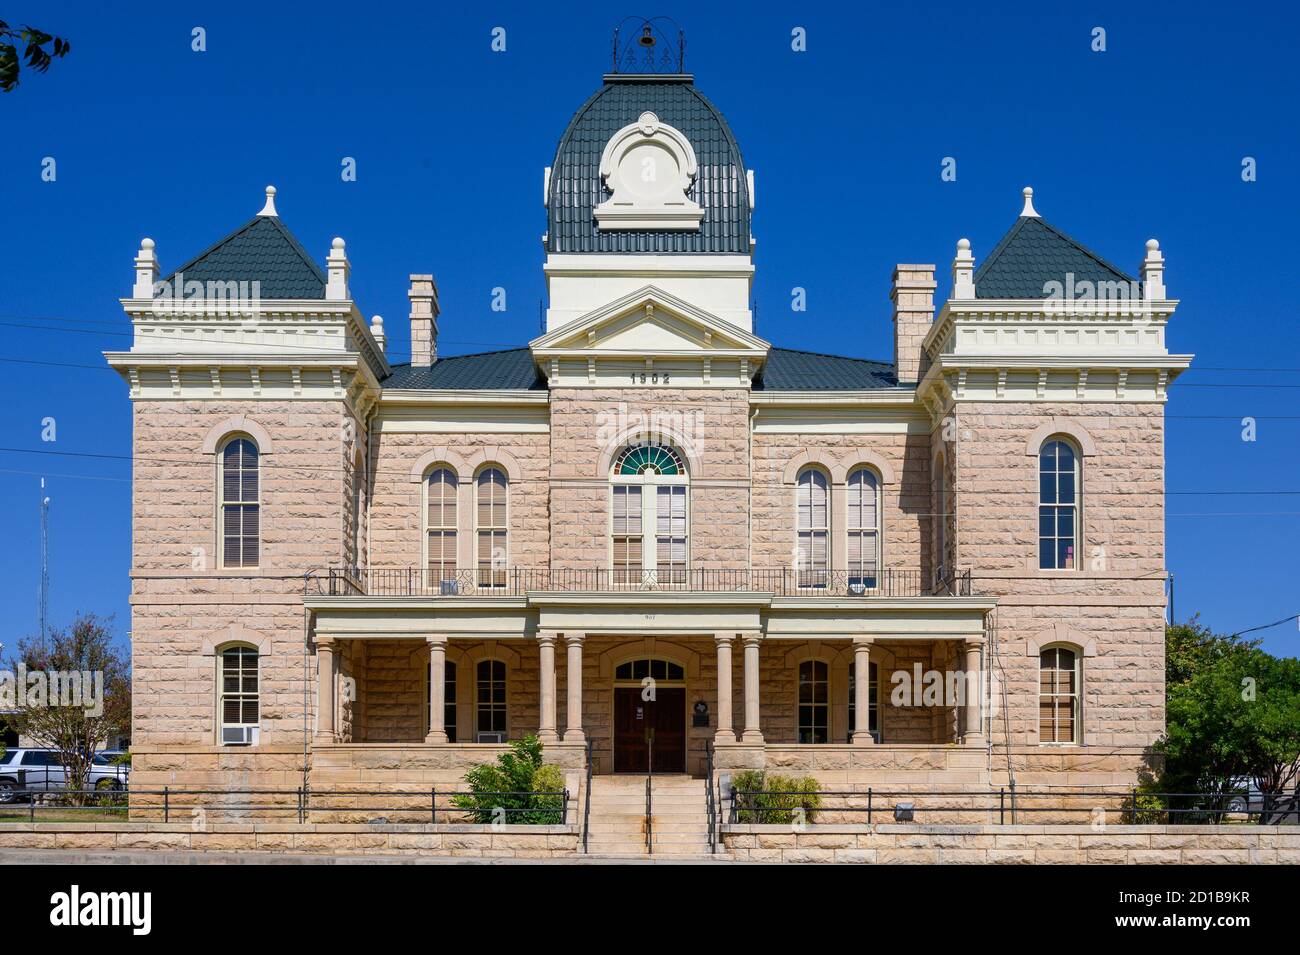 Town Square and Historic Crockett County Courthouse built in 1902. Ozona City in Crockett County in West Texas, United States Stock Photo